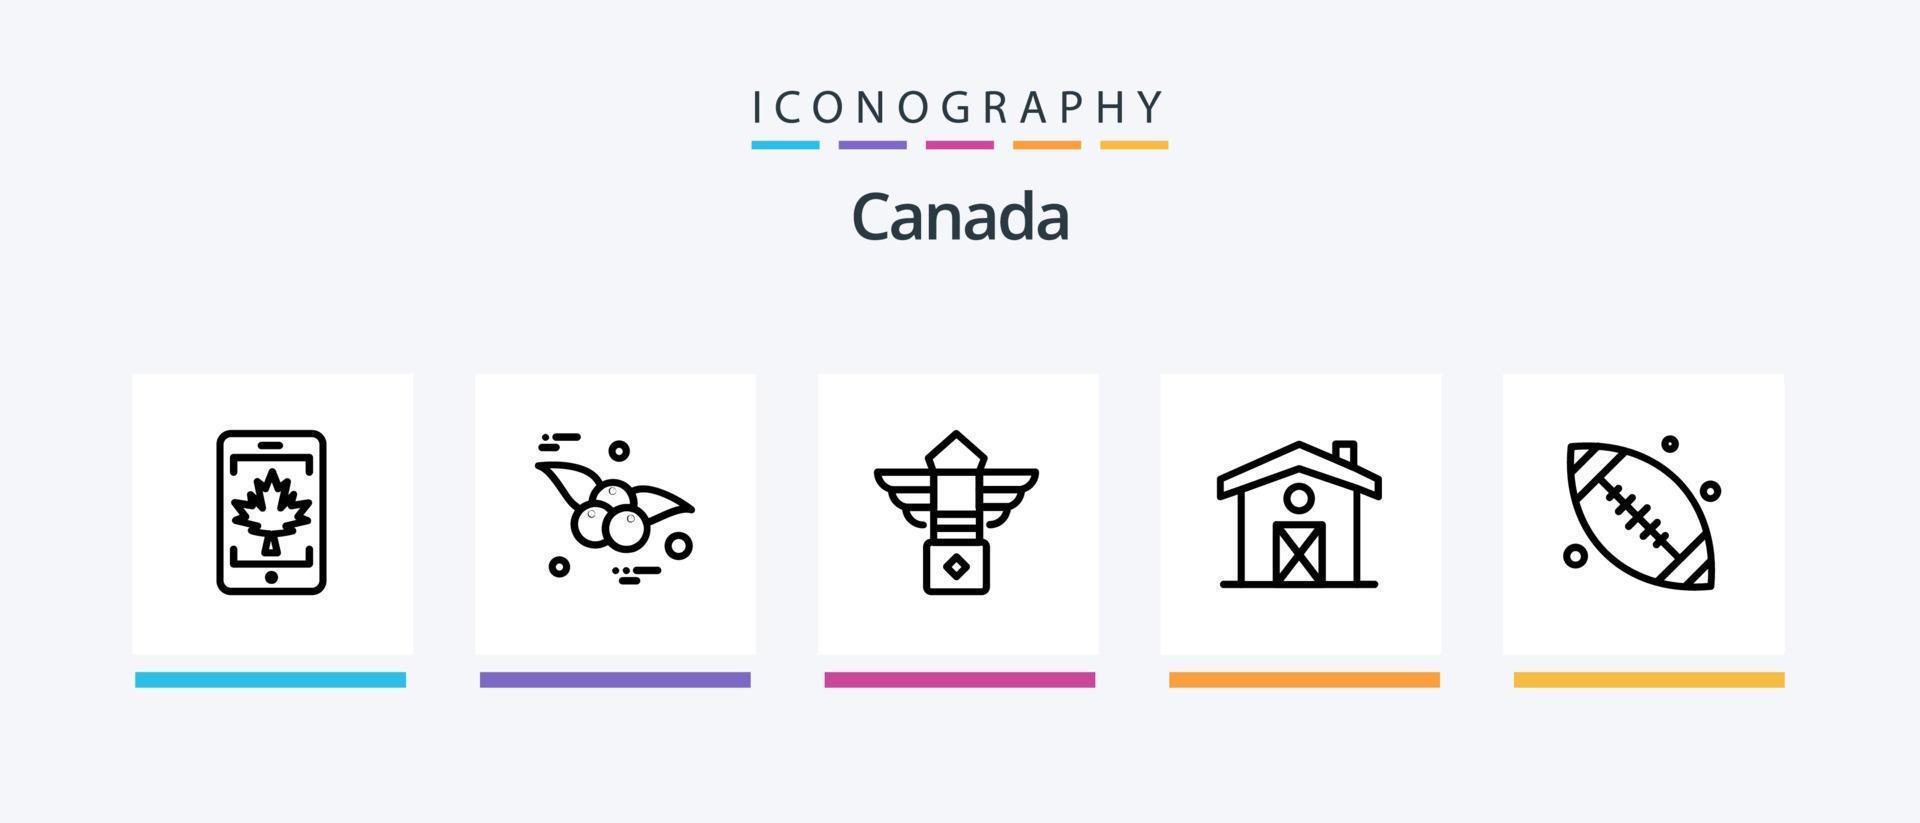 Canada Line 5 Icon Pack Including log. canada. education. cup. bottle. Creative Icons Design vector